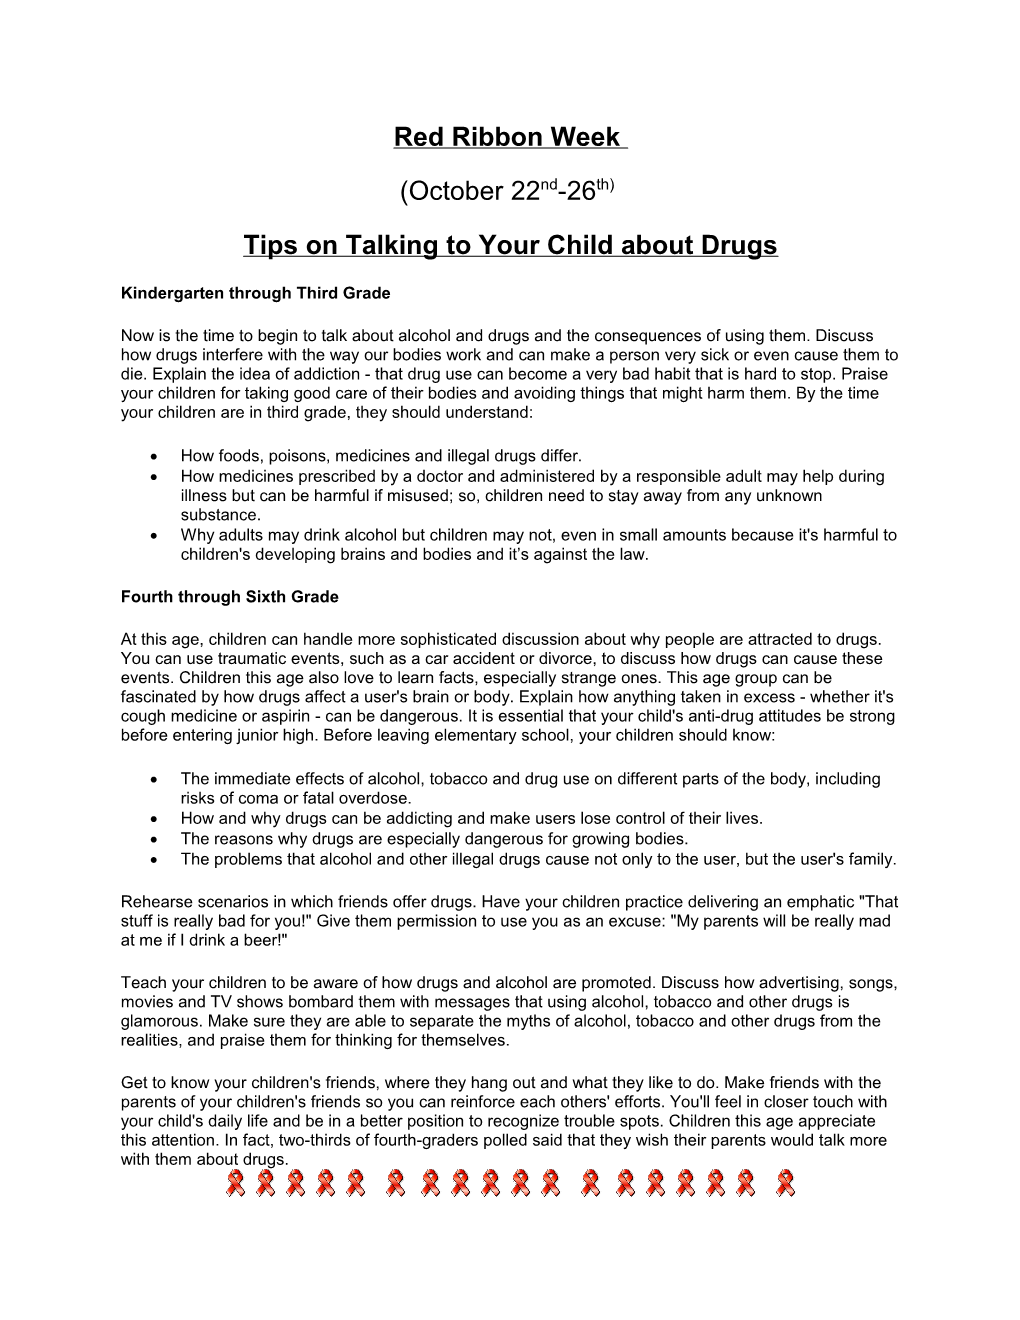 Tips on Talking to Your Child About Drugs